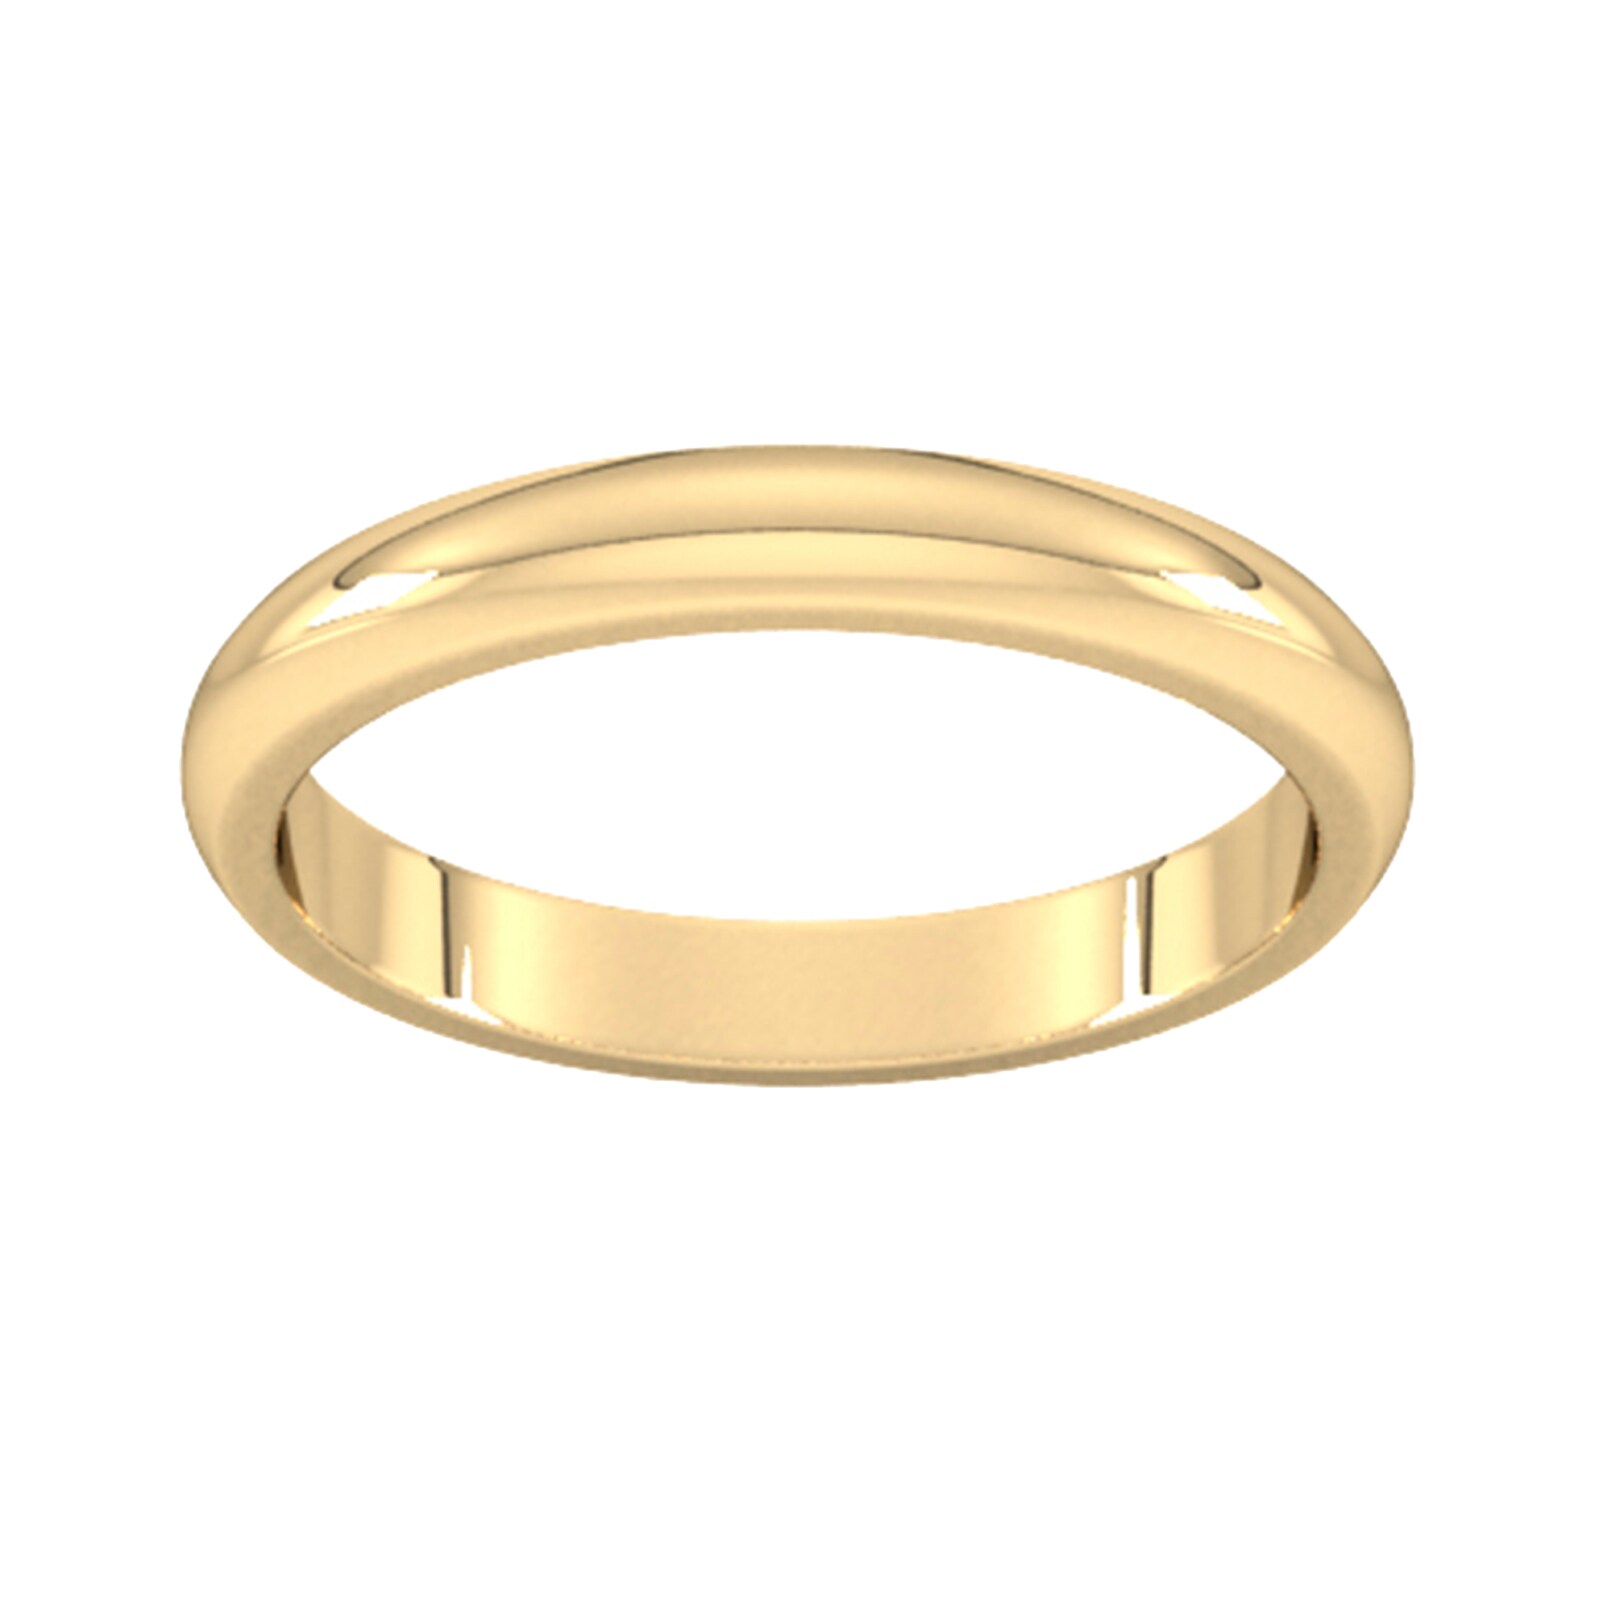 3mm D Shape Heavy Wedding Ring In 9 Carat Yellow Gold - Ring Size N